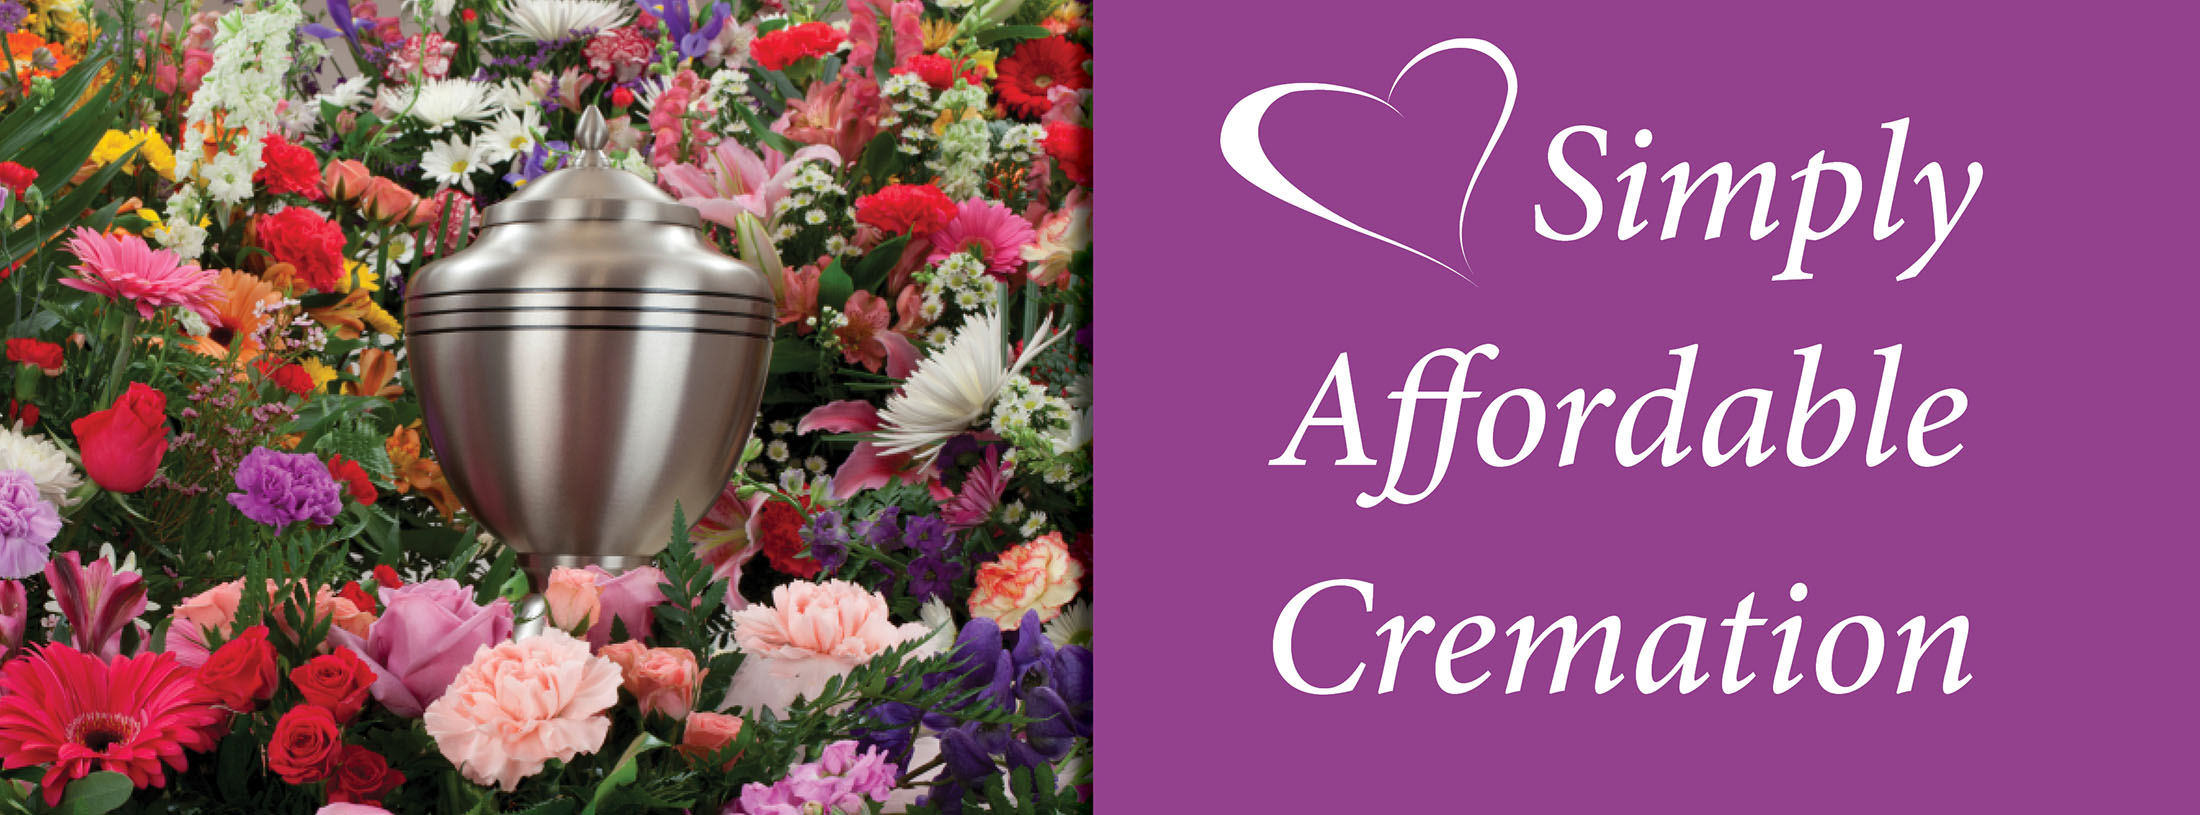 Simply affordable cremation